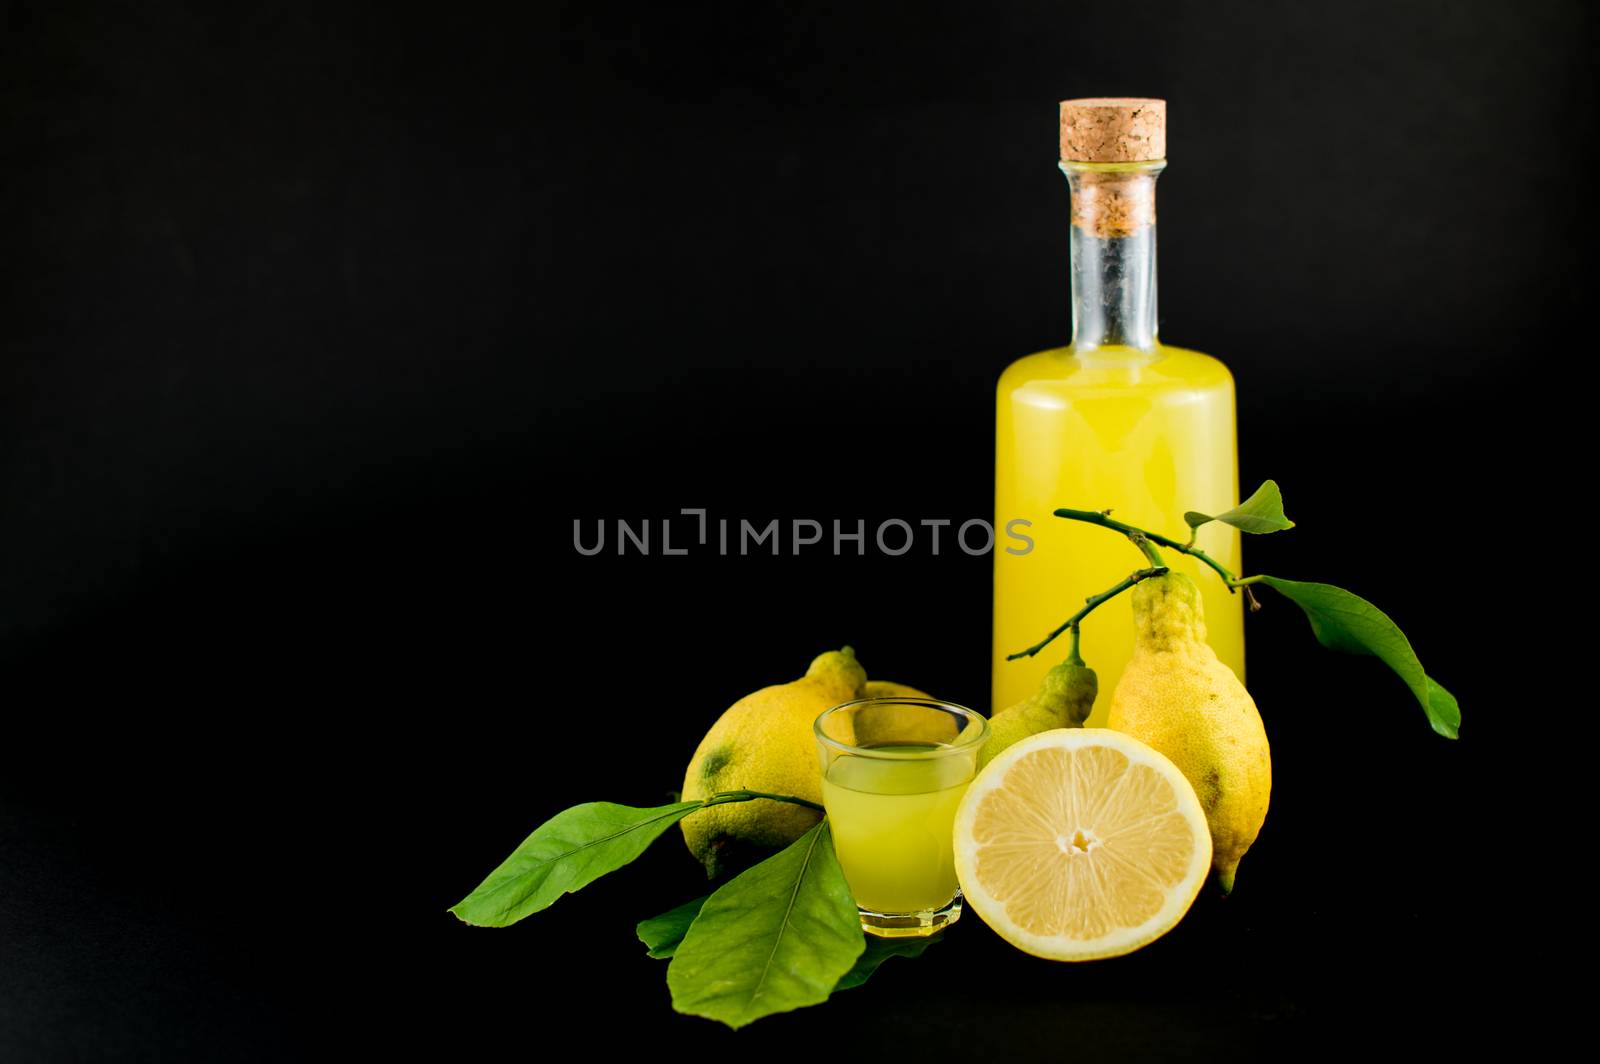 "Limoncello" is the traditional liqueur distilled from the peel of lemons (called sfusato amalfitano) produced in all the Coast of Amalfi until Sorrento. It's a natural liqueur, with special properties, a unique taste, perfumed, obtained by an ancient and simple recipe. It's a compound simple to realize, without added coloring, stabilizing or conserving agents. The simple way and the cure to produce it emphasize the originality and the purity, just like much time ago.